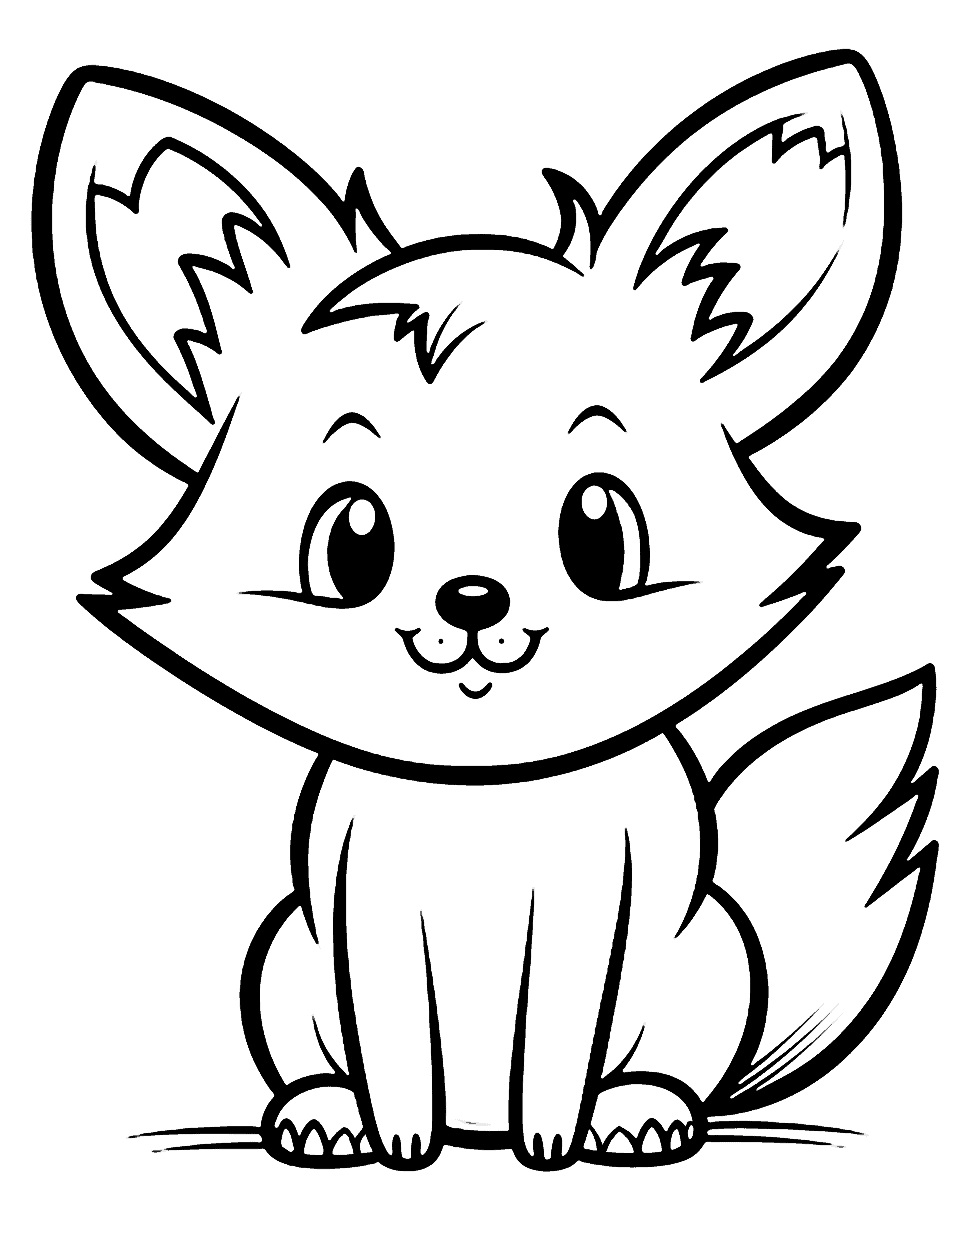 Kawaii Fox Animal Coloring Page - A super cute and chubby fox with a friendly kawaii expression.